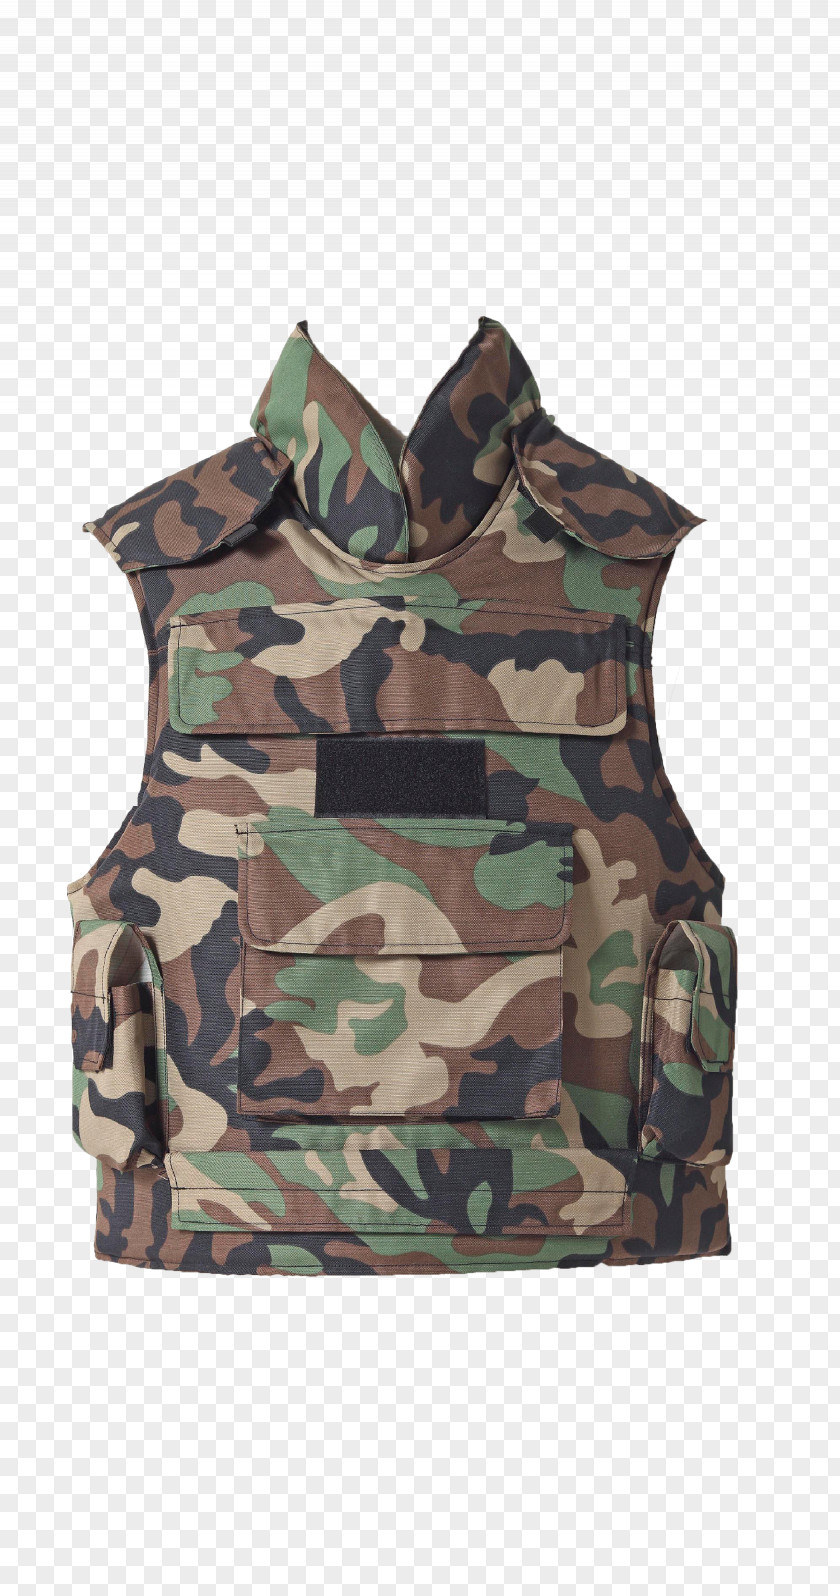 Soldier Military Camouflage Bullet Proof Vests Gilets Waistcoat PNG